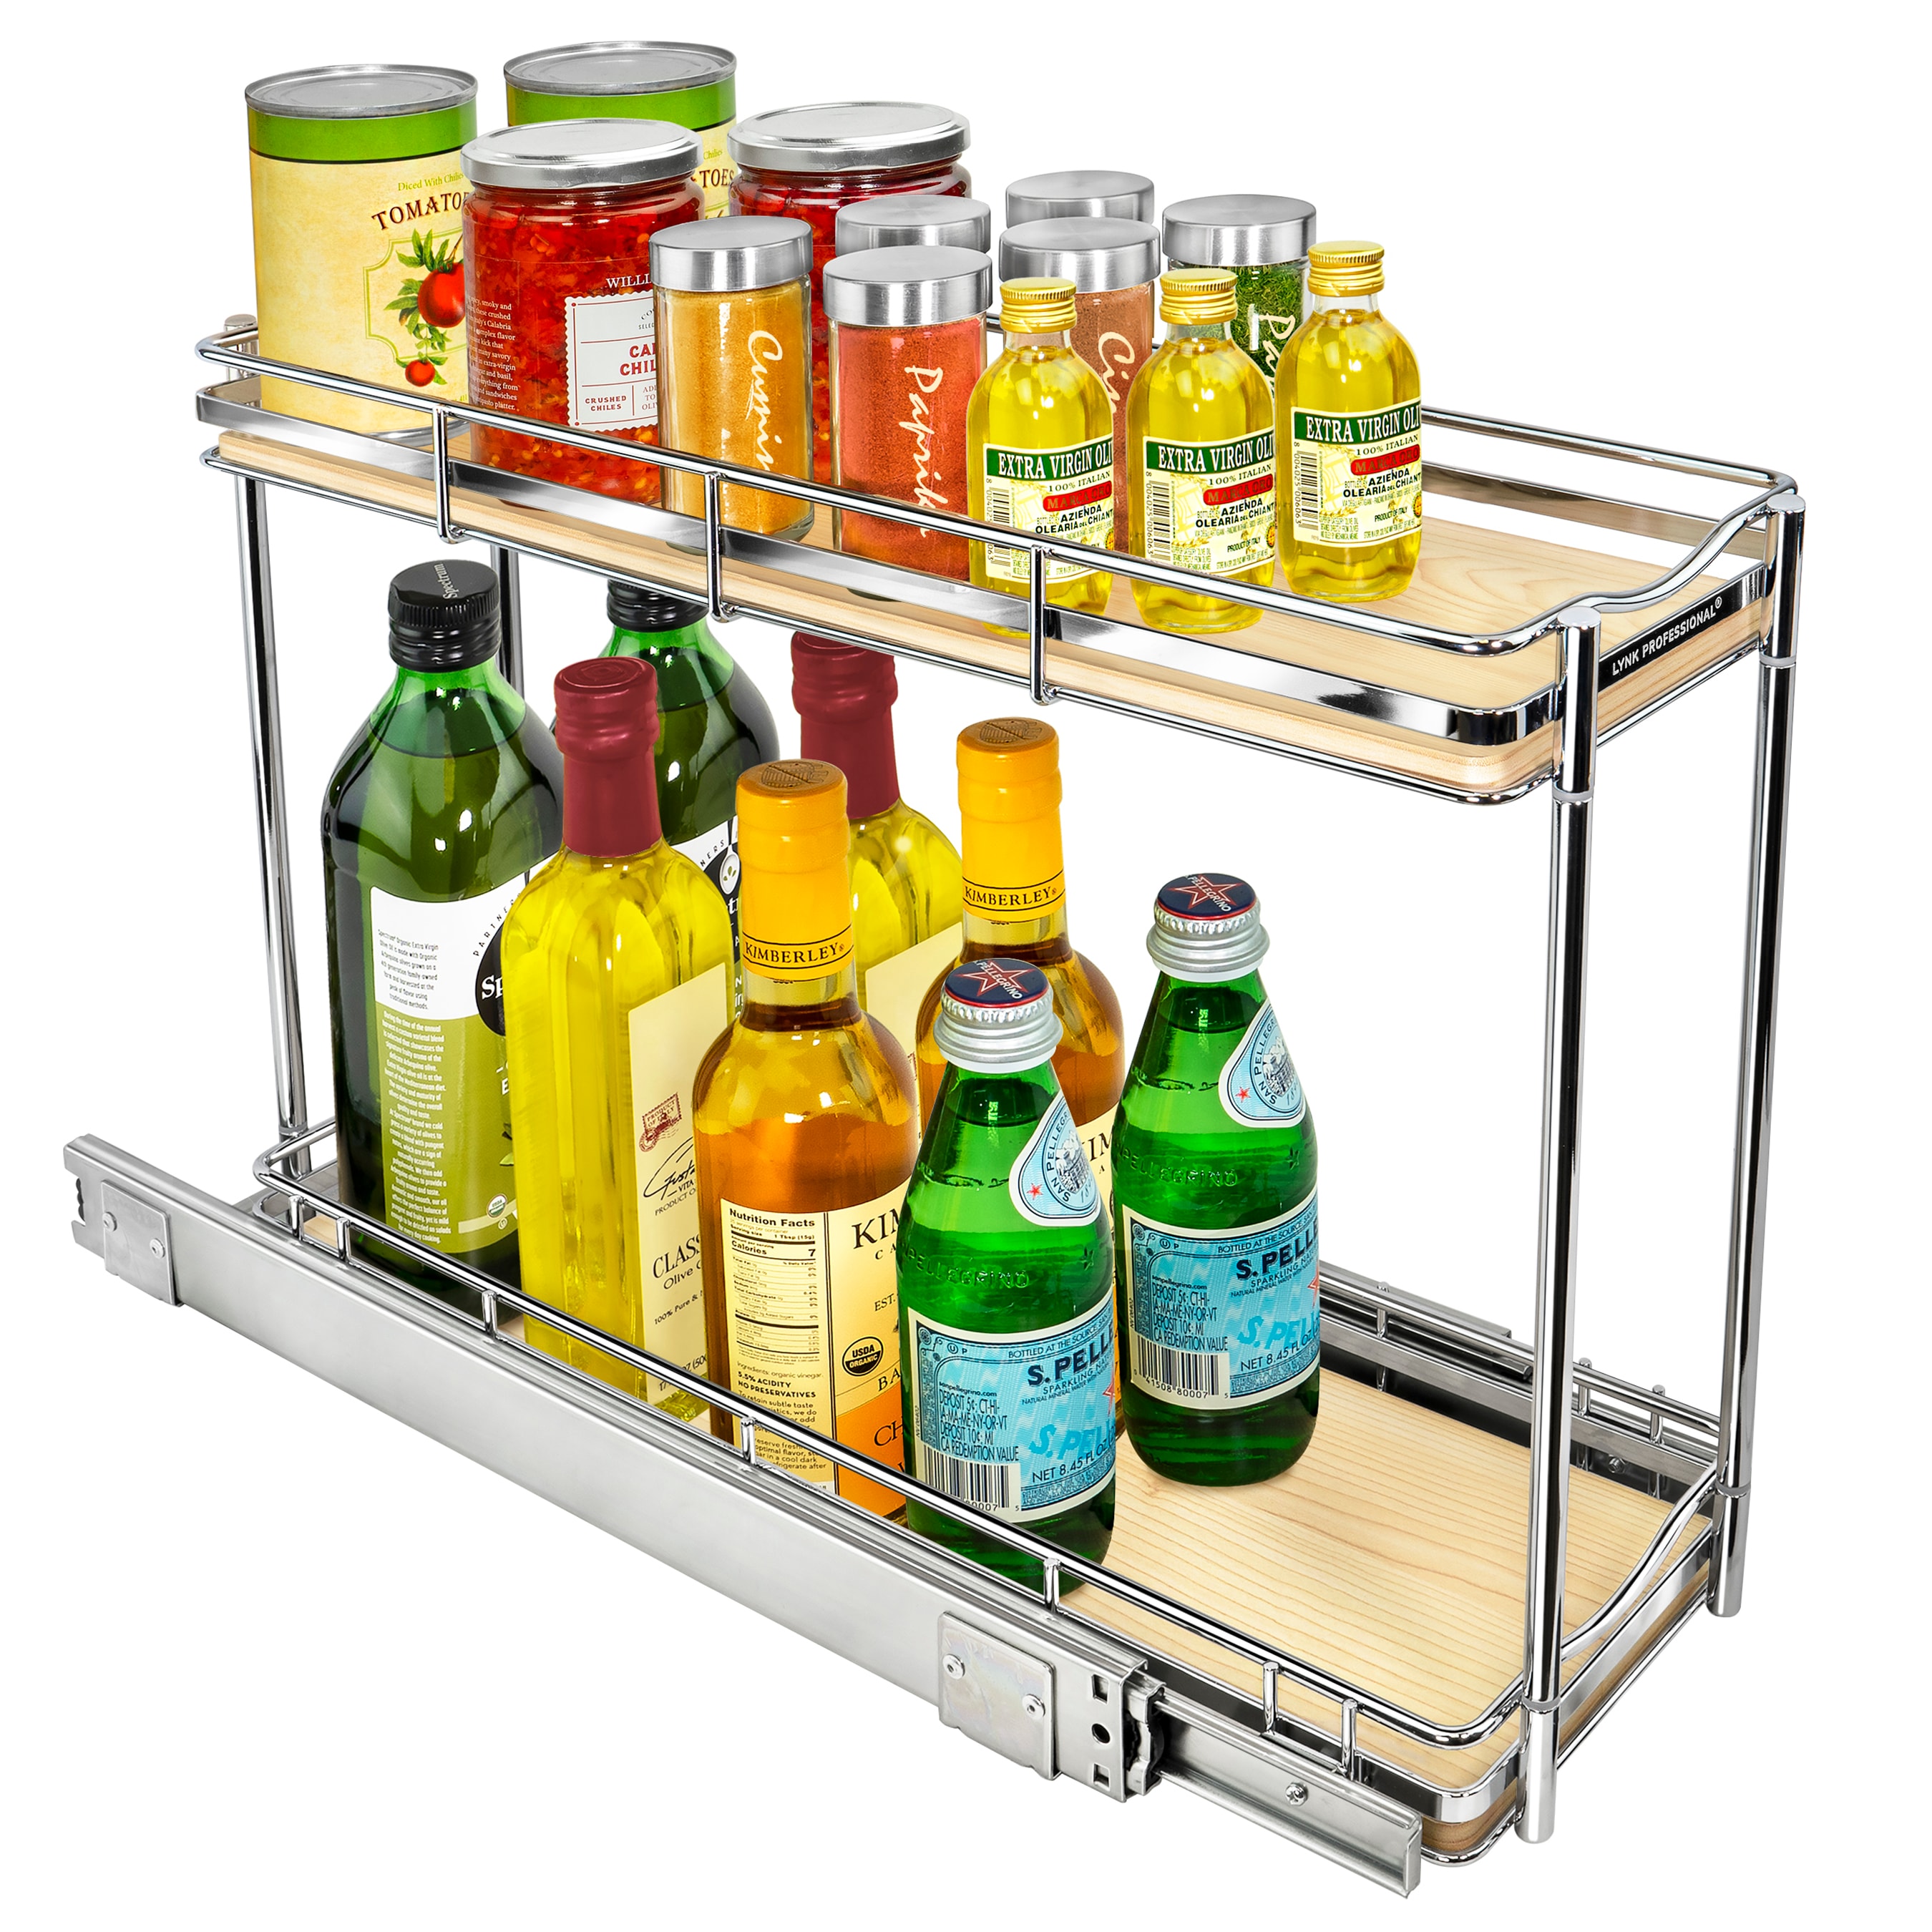 Lynk Professional Spice Rack Tray - 4 Tier Heavy Gauge Steel Drawer Organizer for Kitchen Cabinets, Silver Metallic, Large